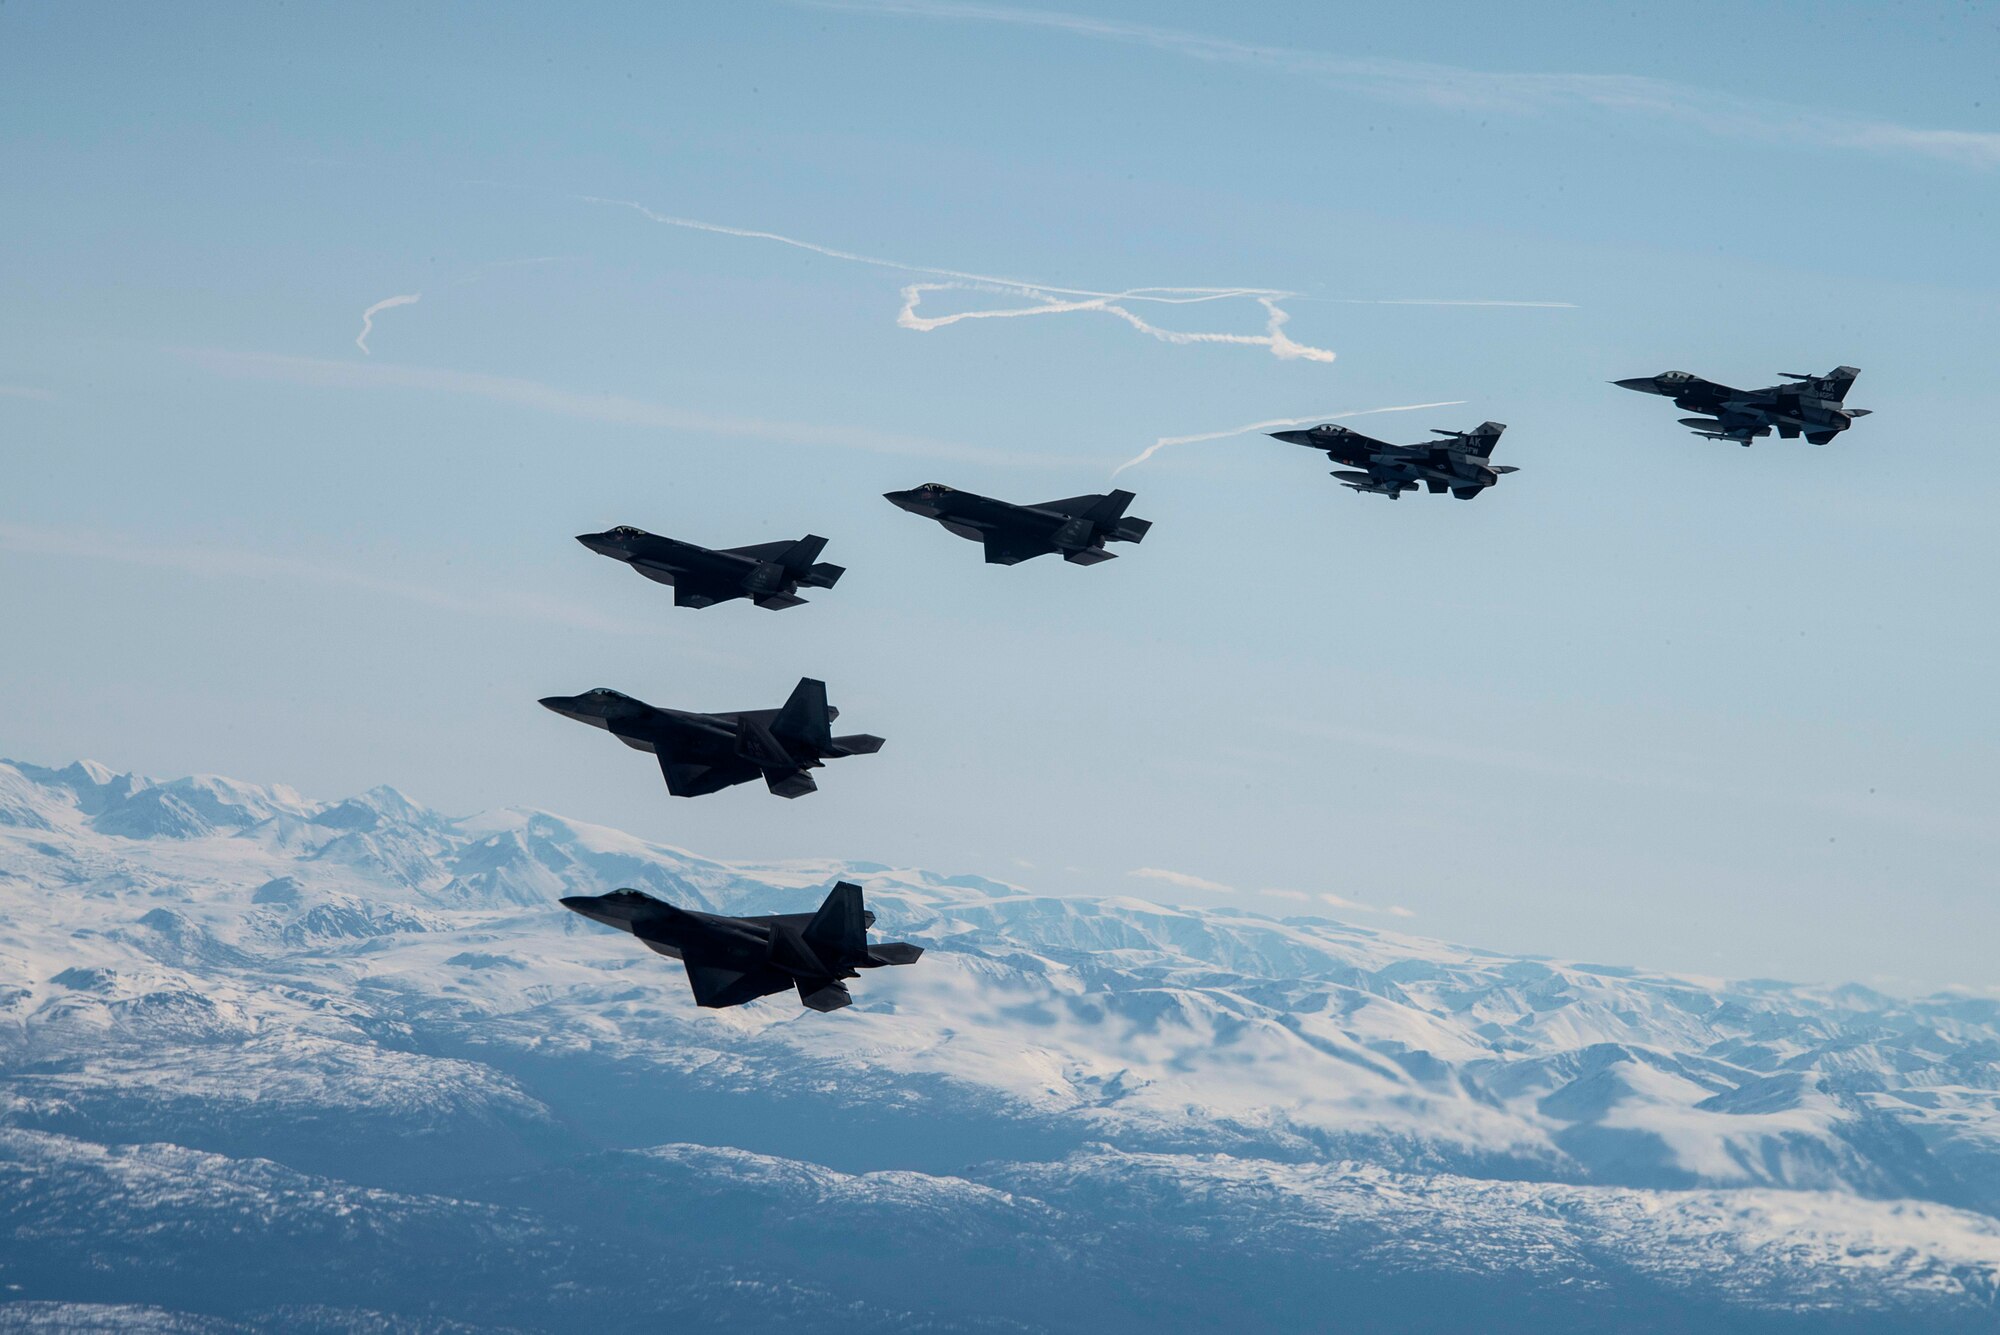 Two F-35A Lightning IIs and two F-16 Fighting Falcons assigned to Eielson Air Force Base fly alongside two F-22 Raptors assigned to Joint Base Elmendorf-Richardson as part of a mass formation flight May 5, 2020.